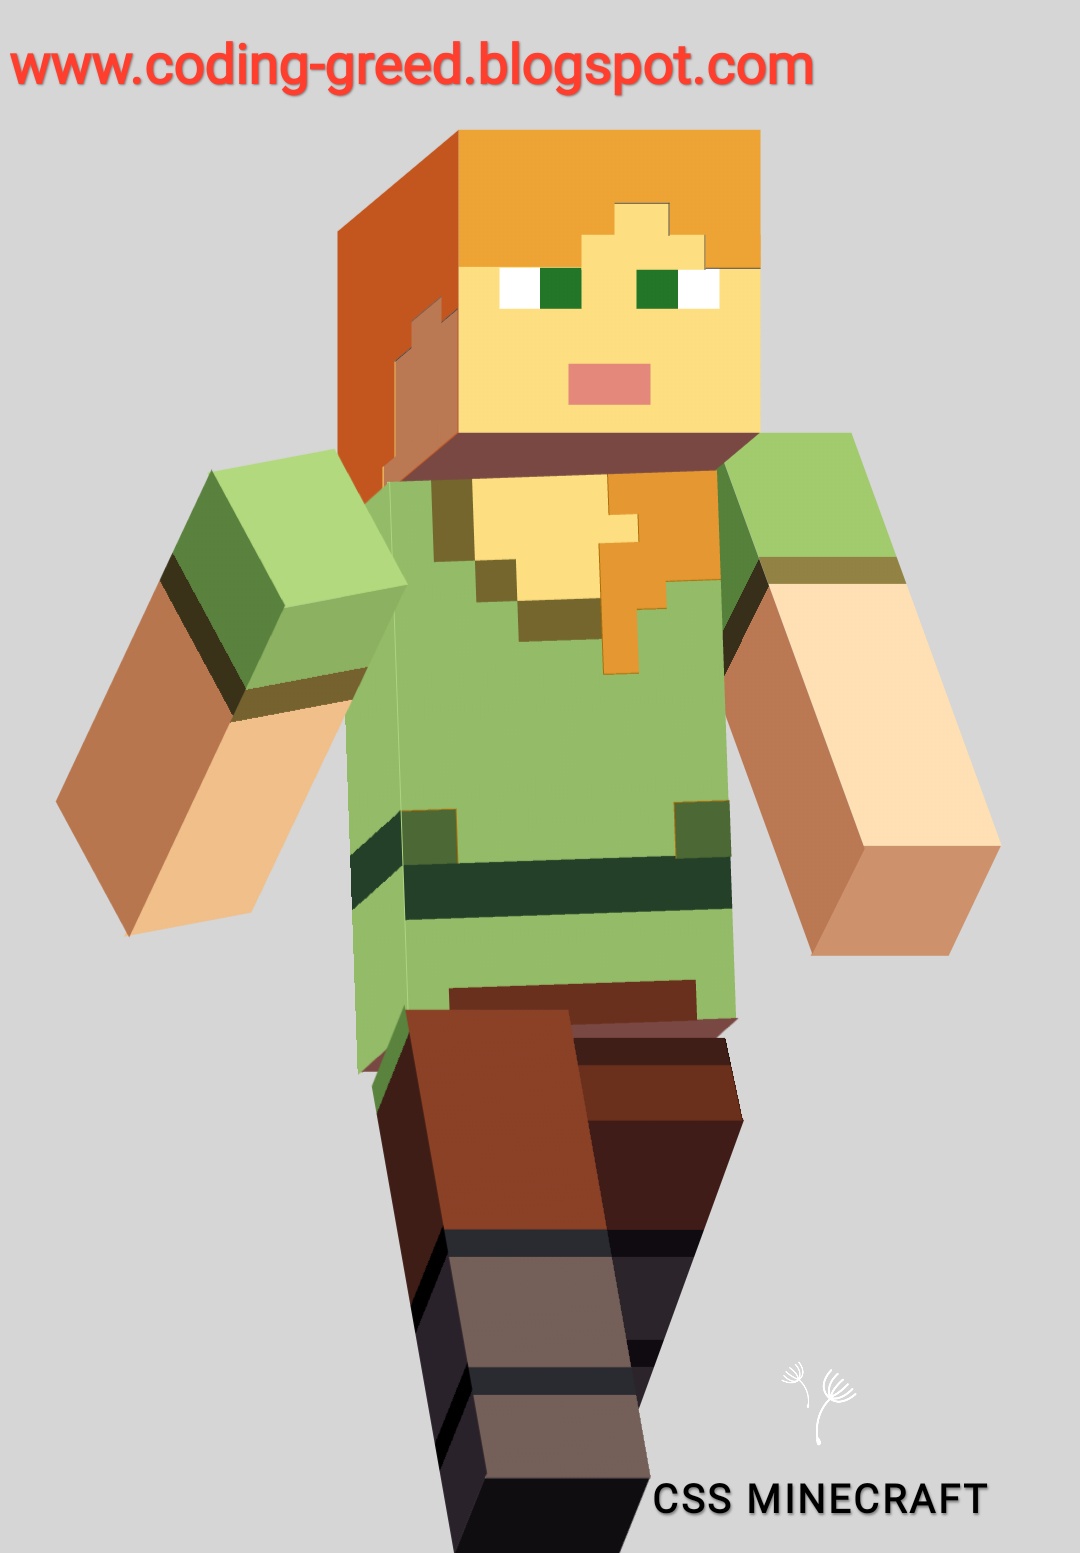 CSS MINECRAFT CHARACTER ~ CODING-GREED